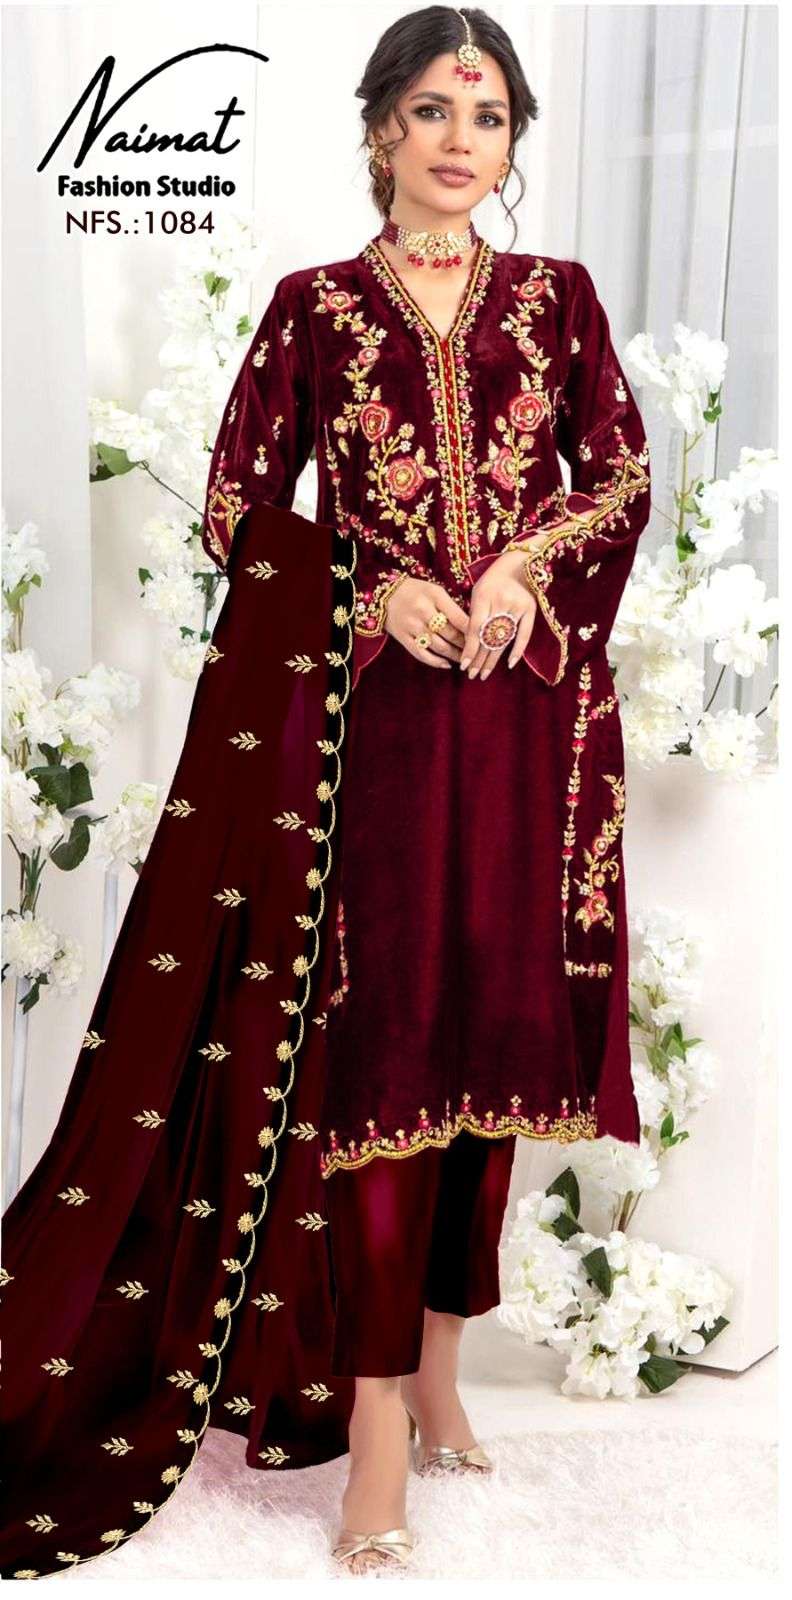 naimat fashion studio nfs 1084  luxurious pret collection classic diamond work in top and sleeve with 9000 velvet pant n designer dupatta with embroidery work 